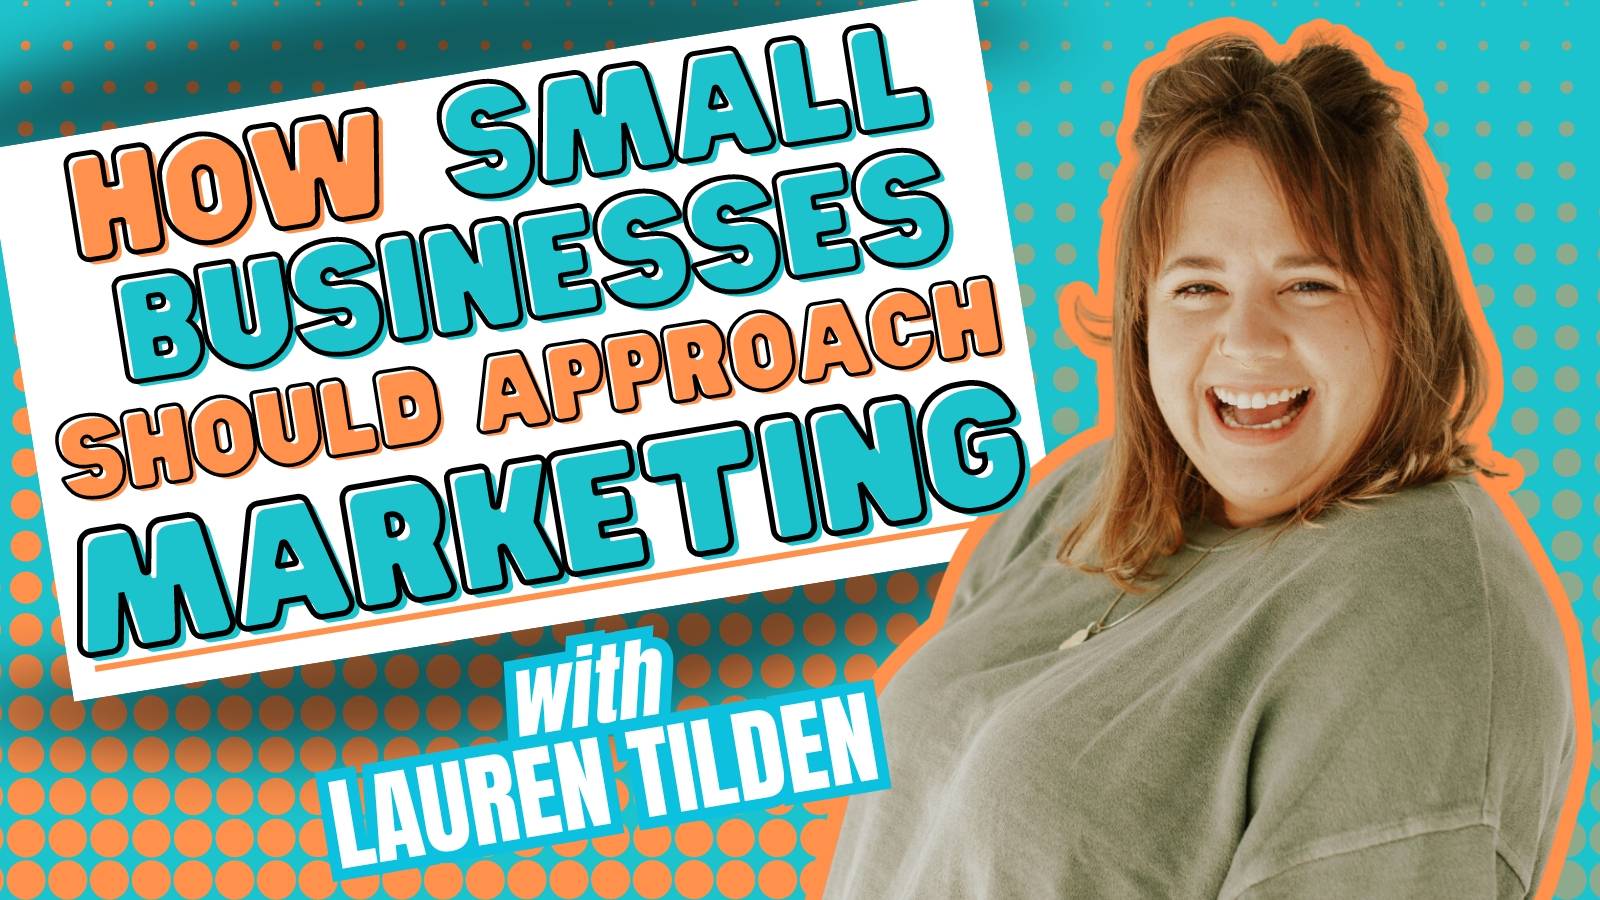 How Small Businesses Should Approach Marketing